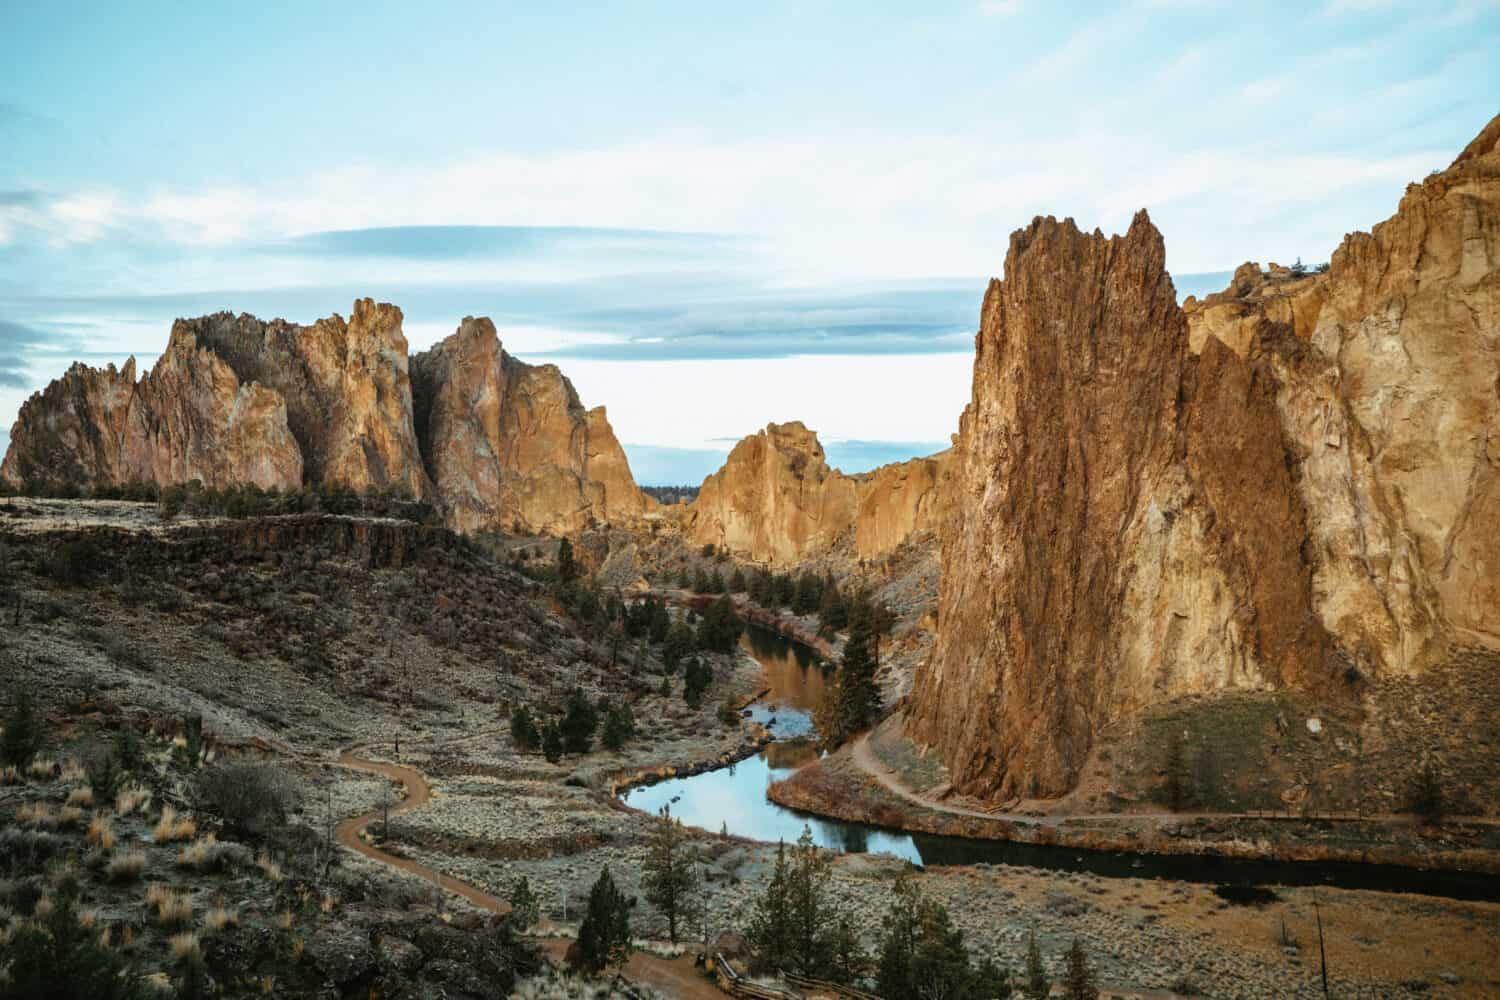 Hikes at Smith Rock State Park